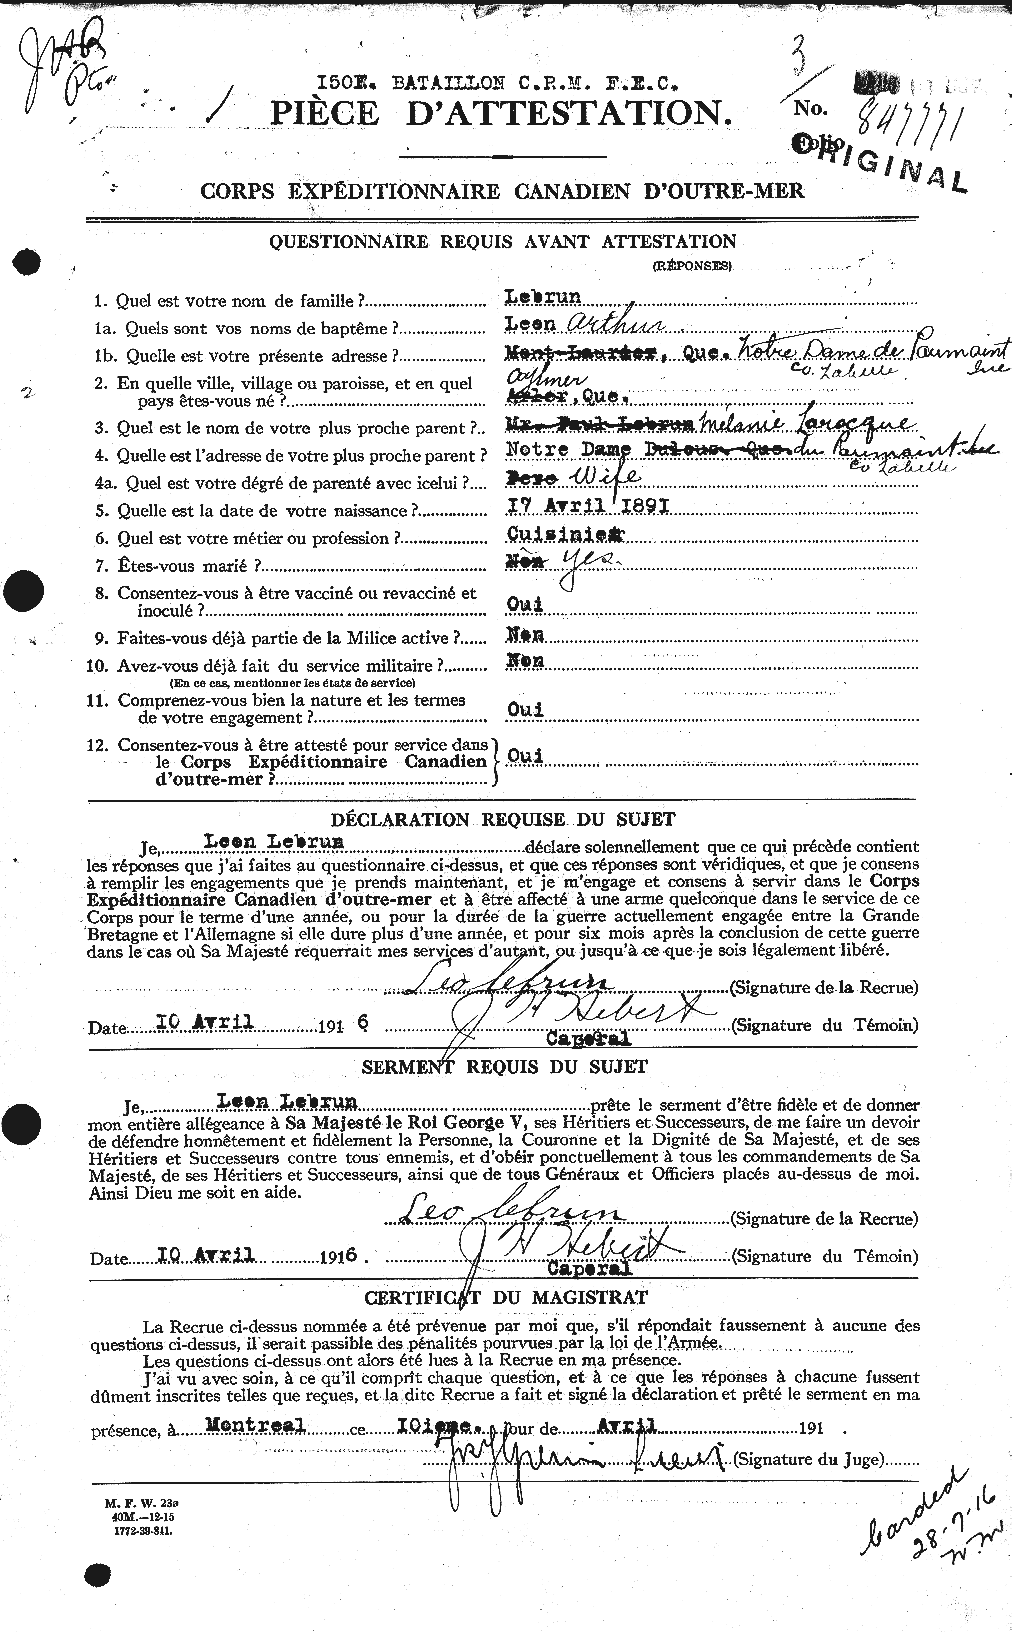 Personnel Records of the First World War - CEF 461578a